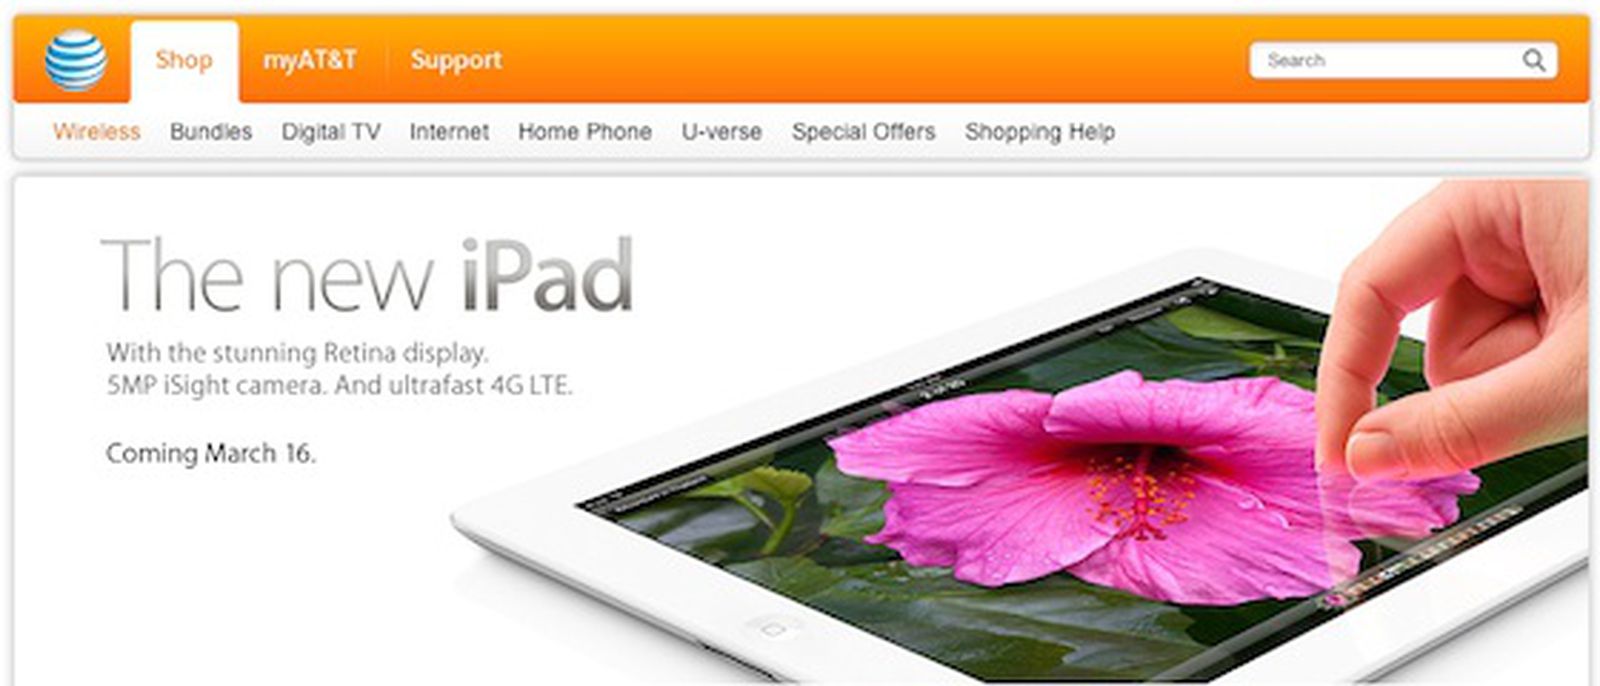 AT&T Announces Plans to Offer iPad WiFi + 4G Beginning on March 16